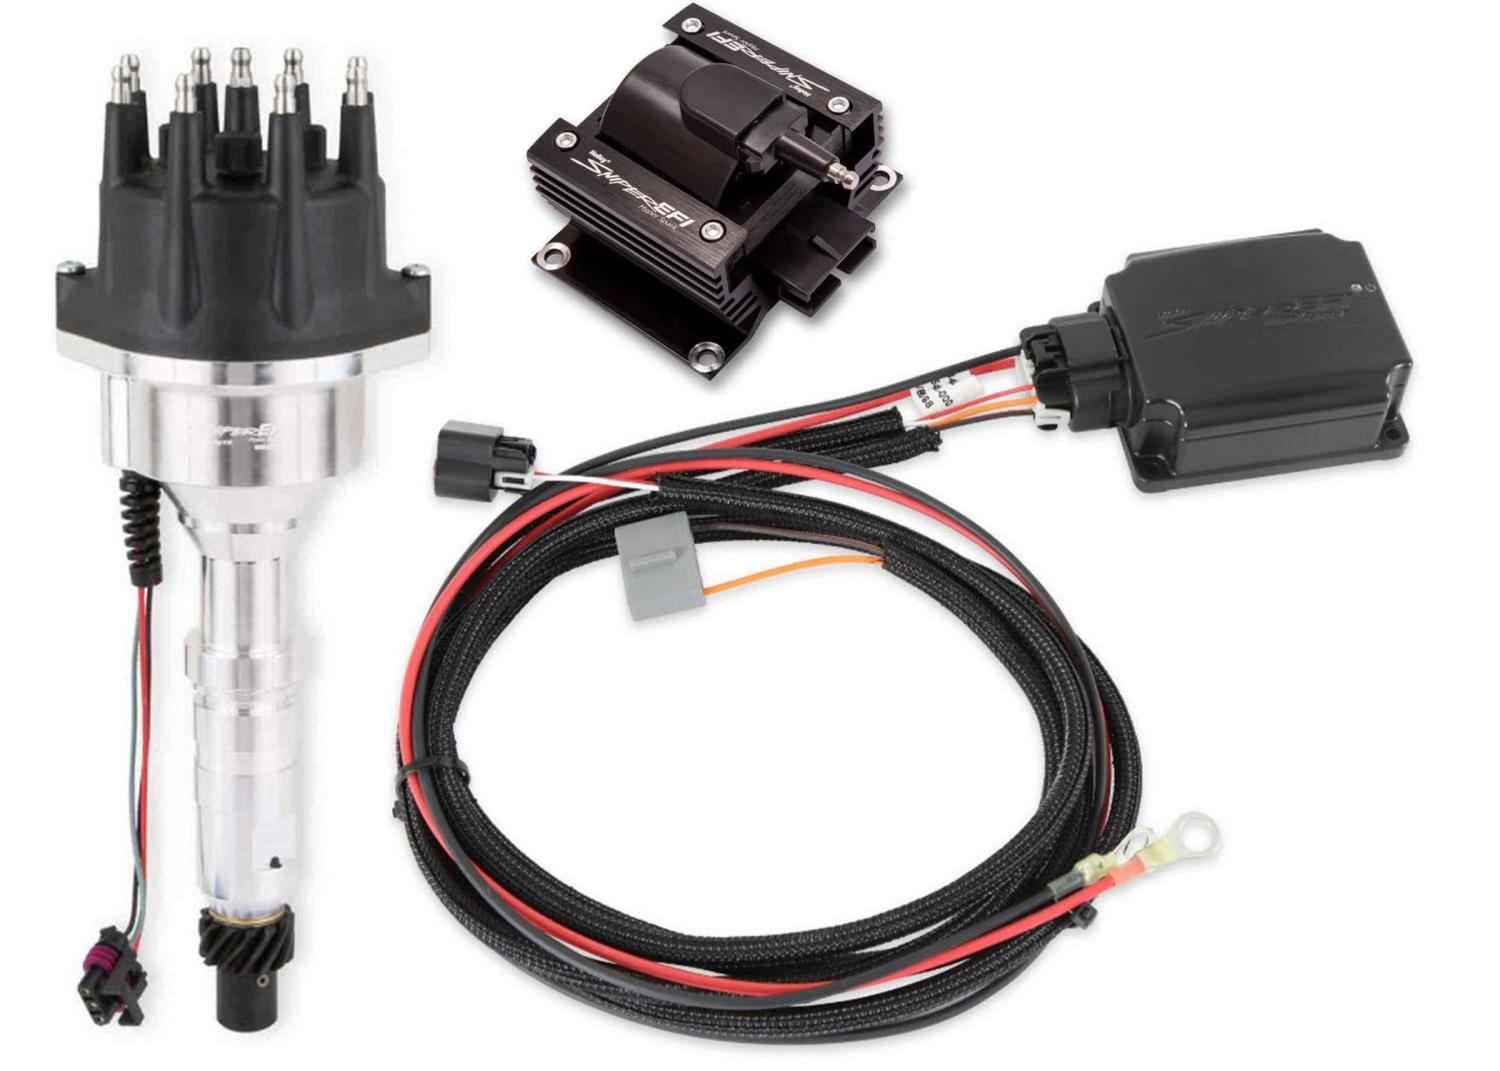 565-313 Sniper EFI HyperSpark Distributor Kit for Buick 322, 364, 401, 425 ci. Engines (w/HyperSpark II Ignition Box)